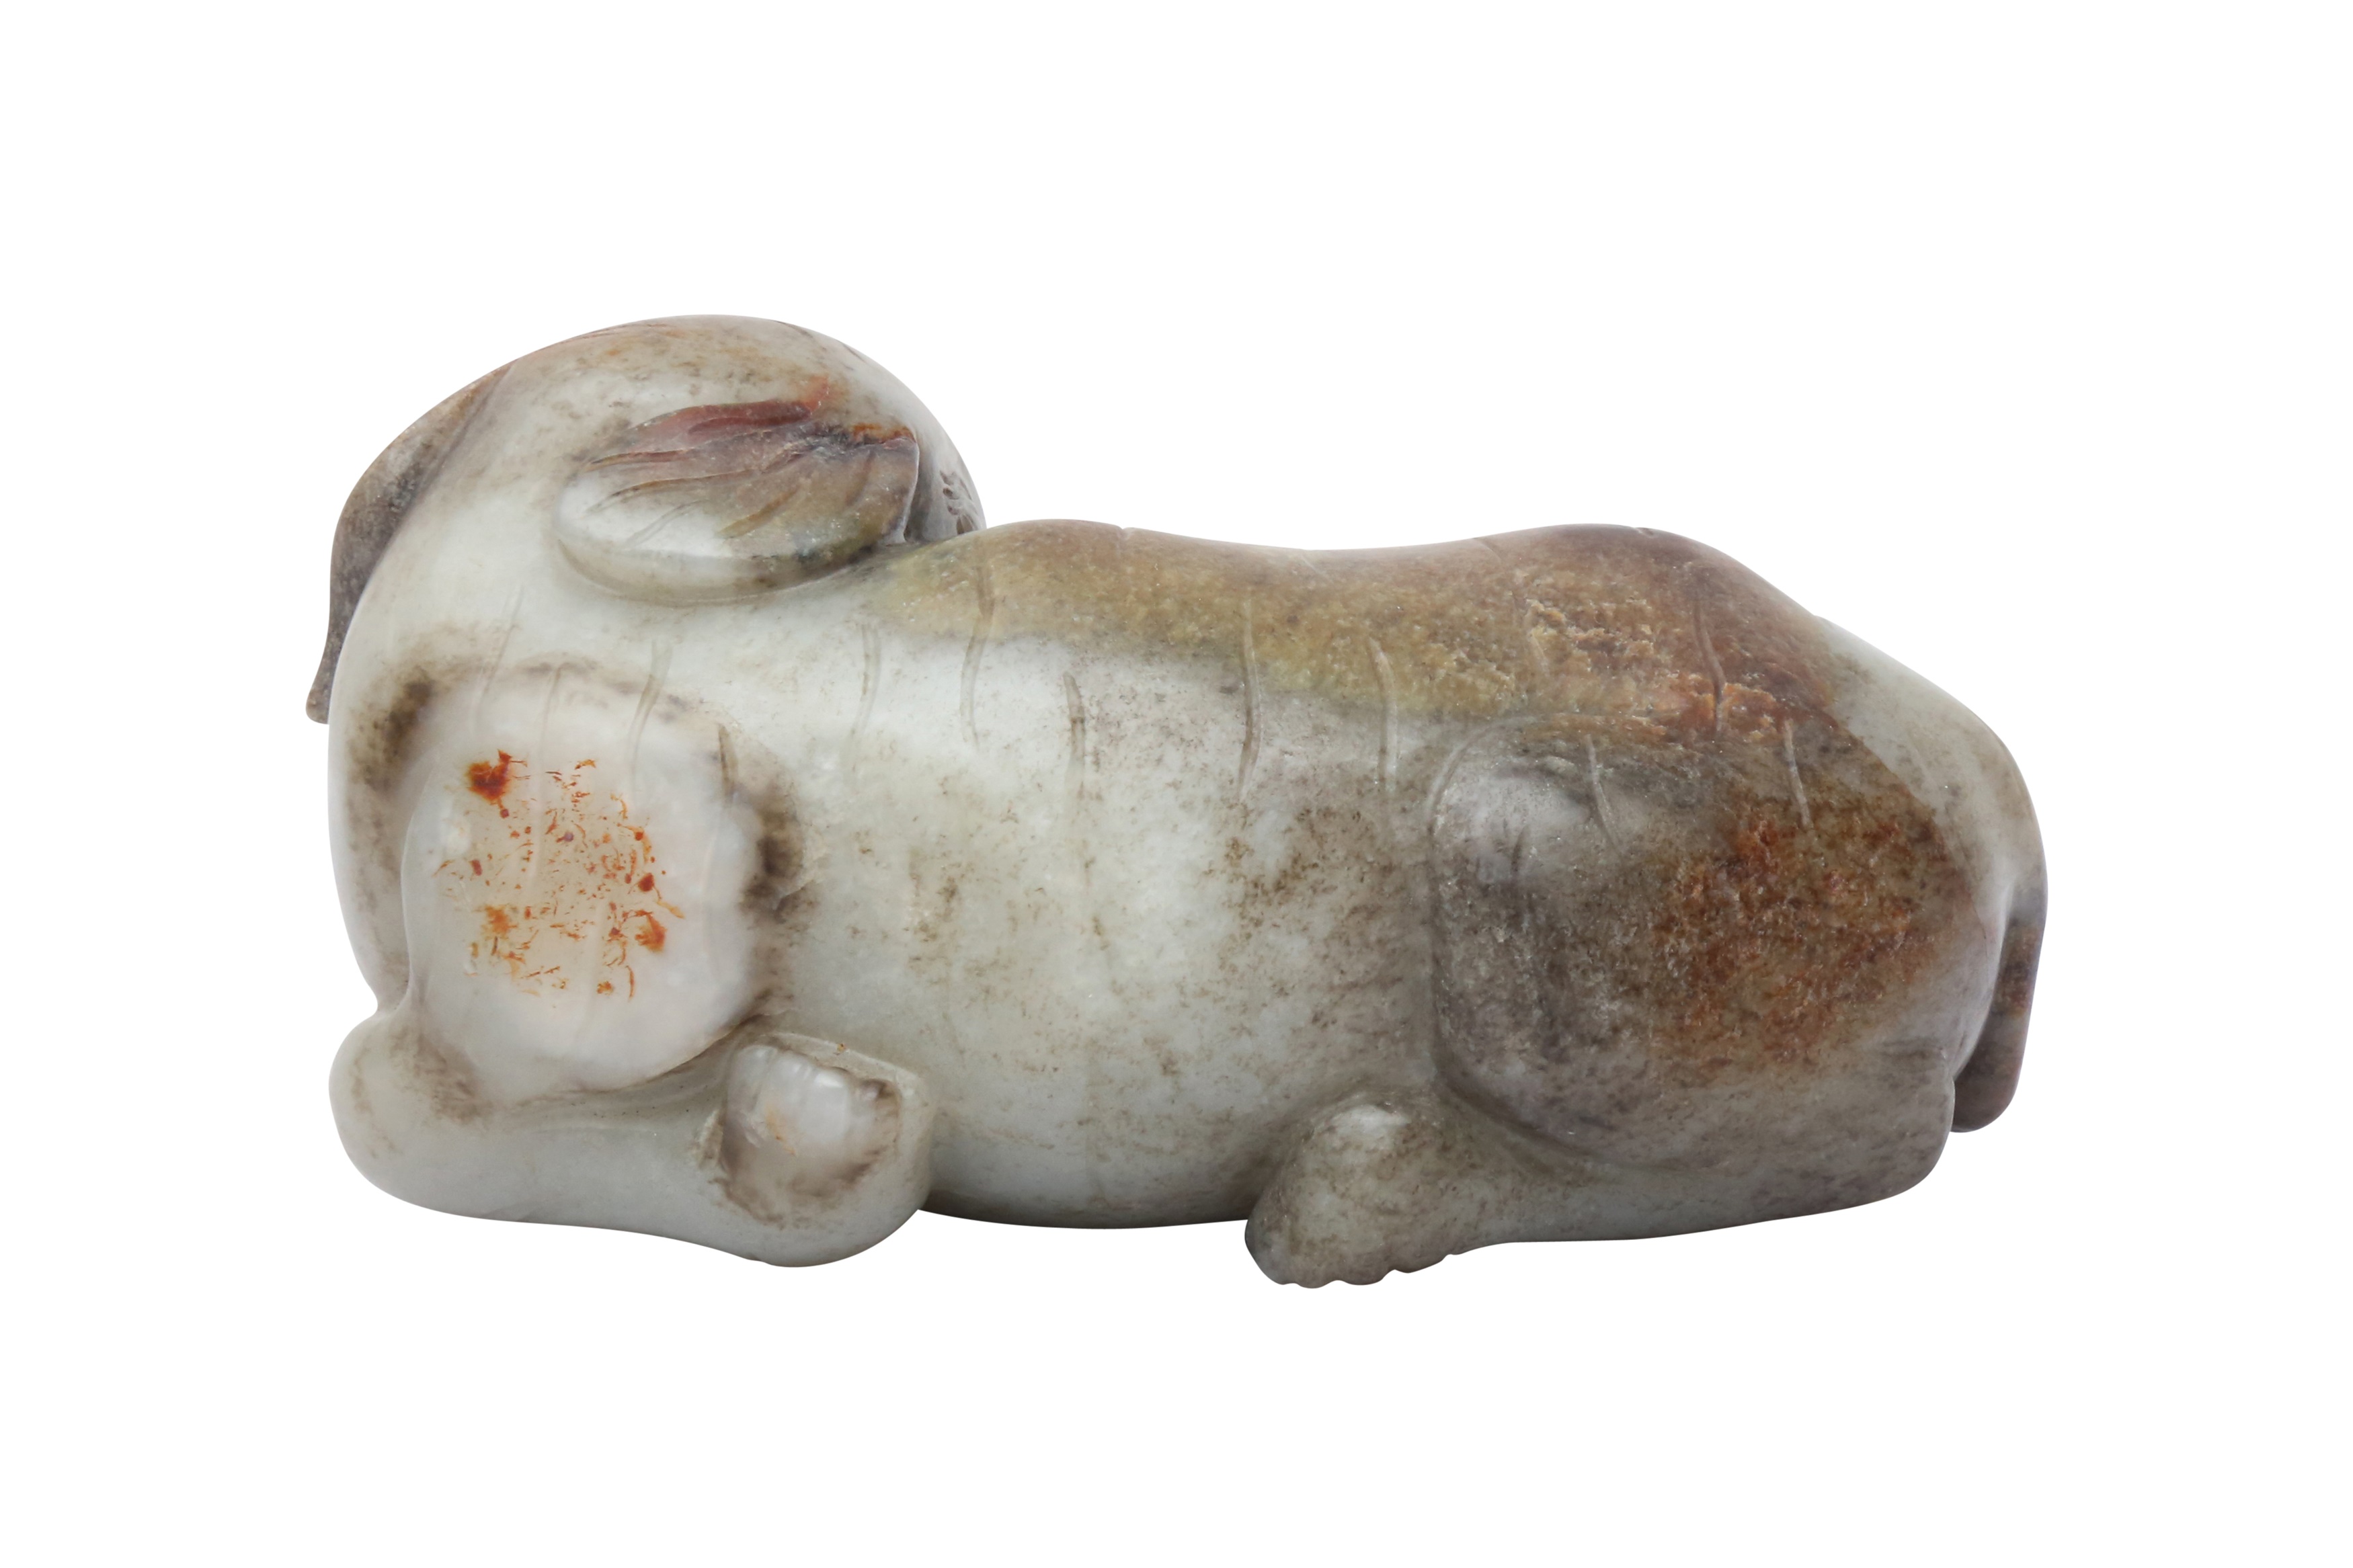 A CHINESE PALE-CELADON AND RUSSET JADE 'ELEPHANT' CARVING 清 青白玉雕象 - Image 2 of 16